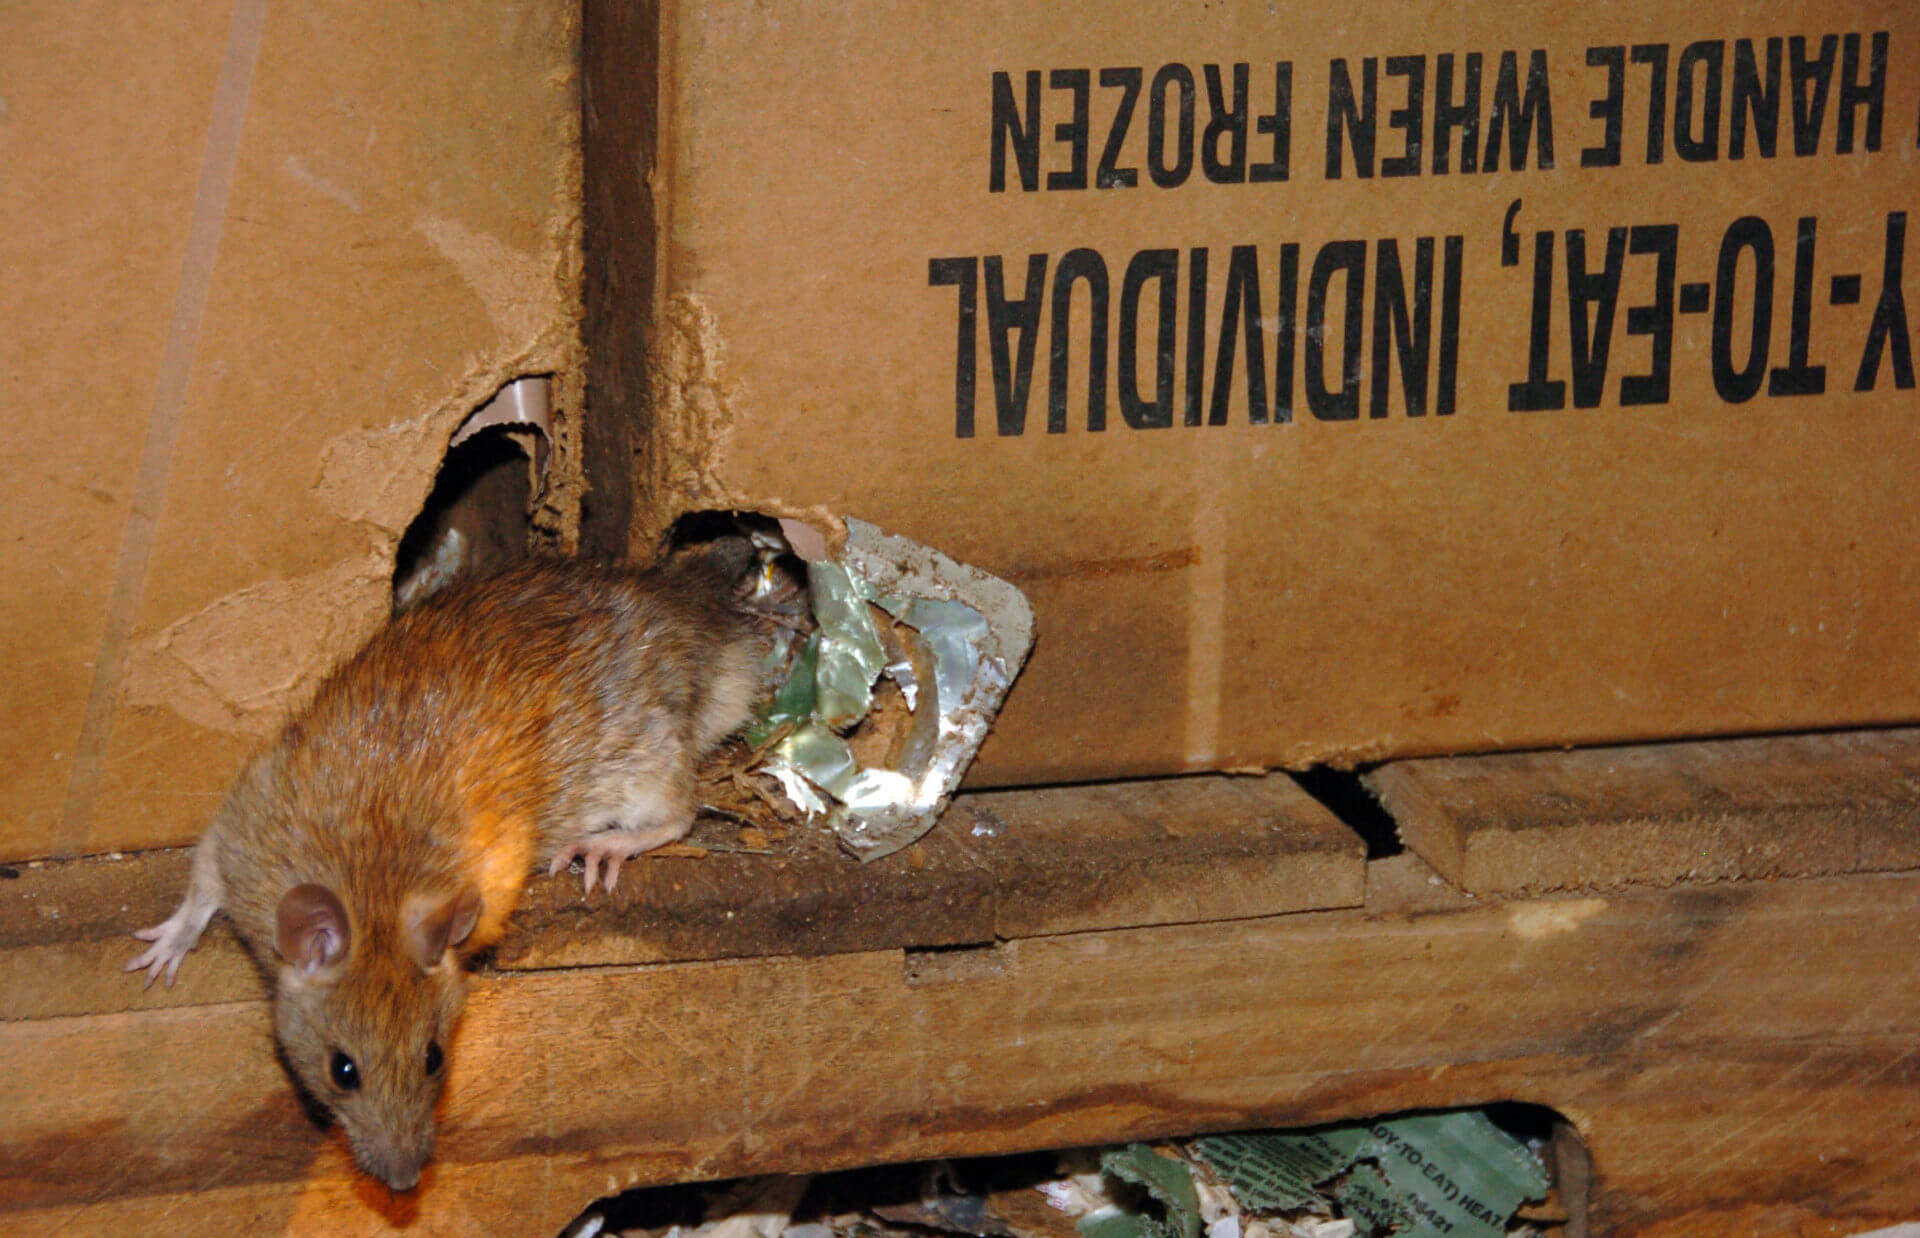 Image of rat infesting a food in a restaurant